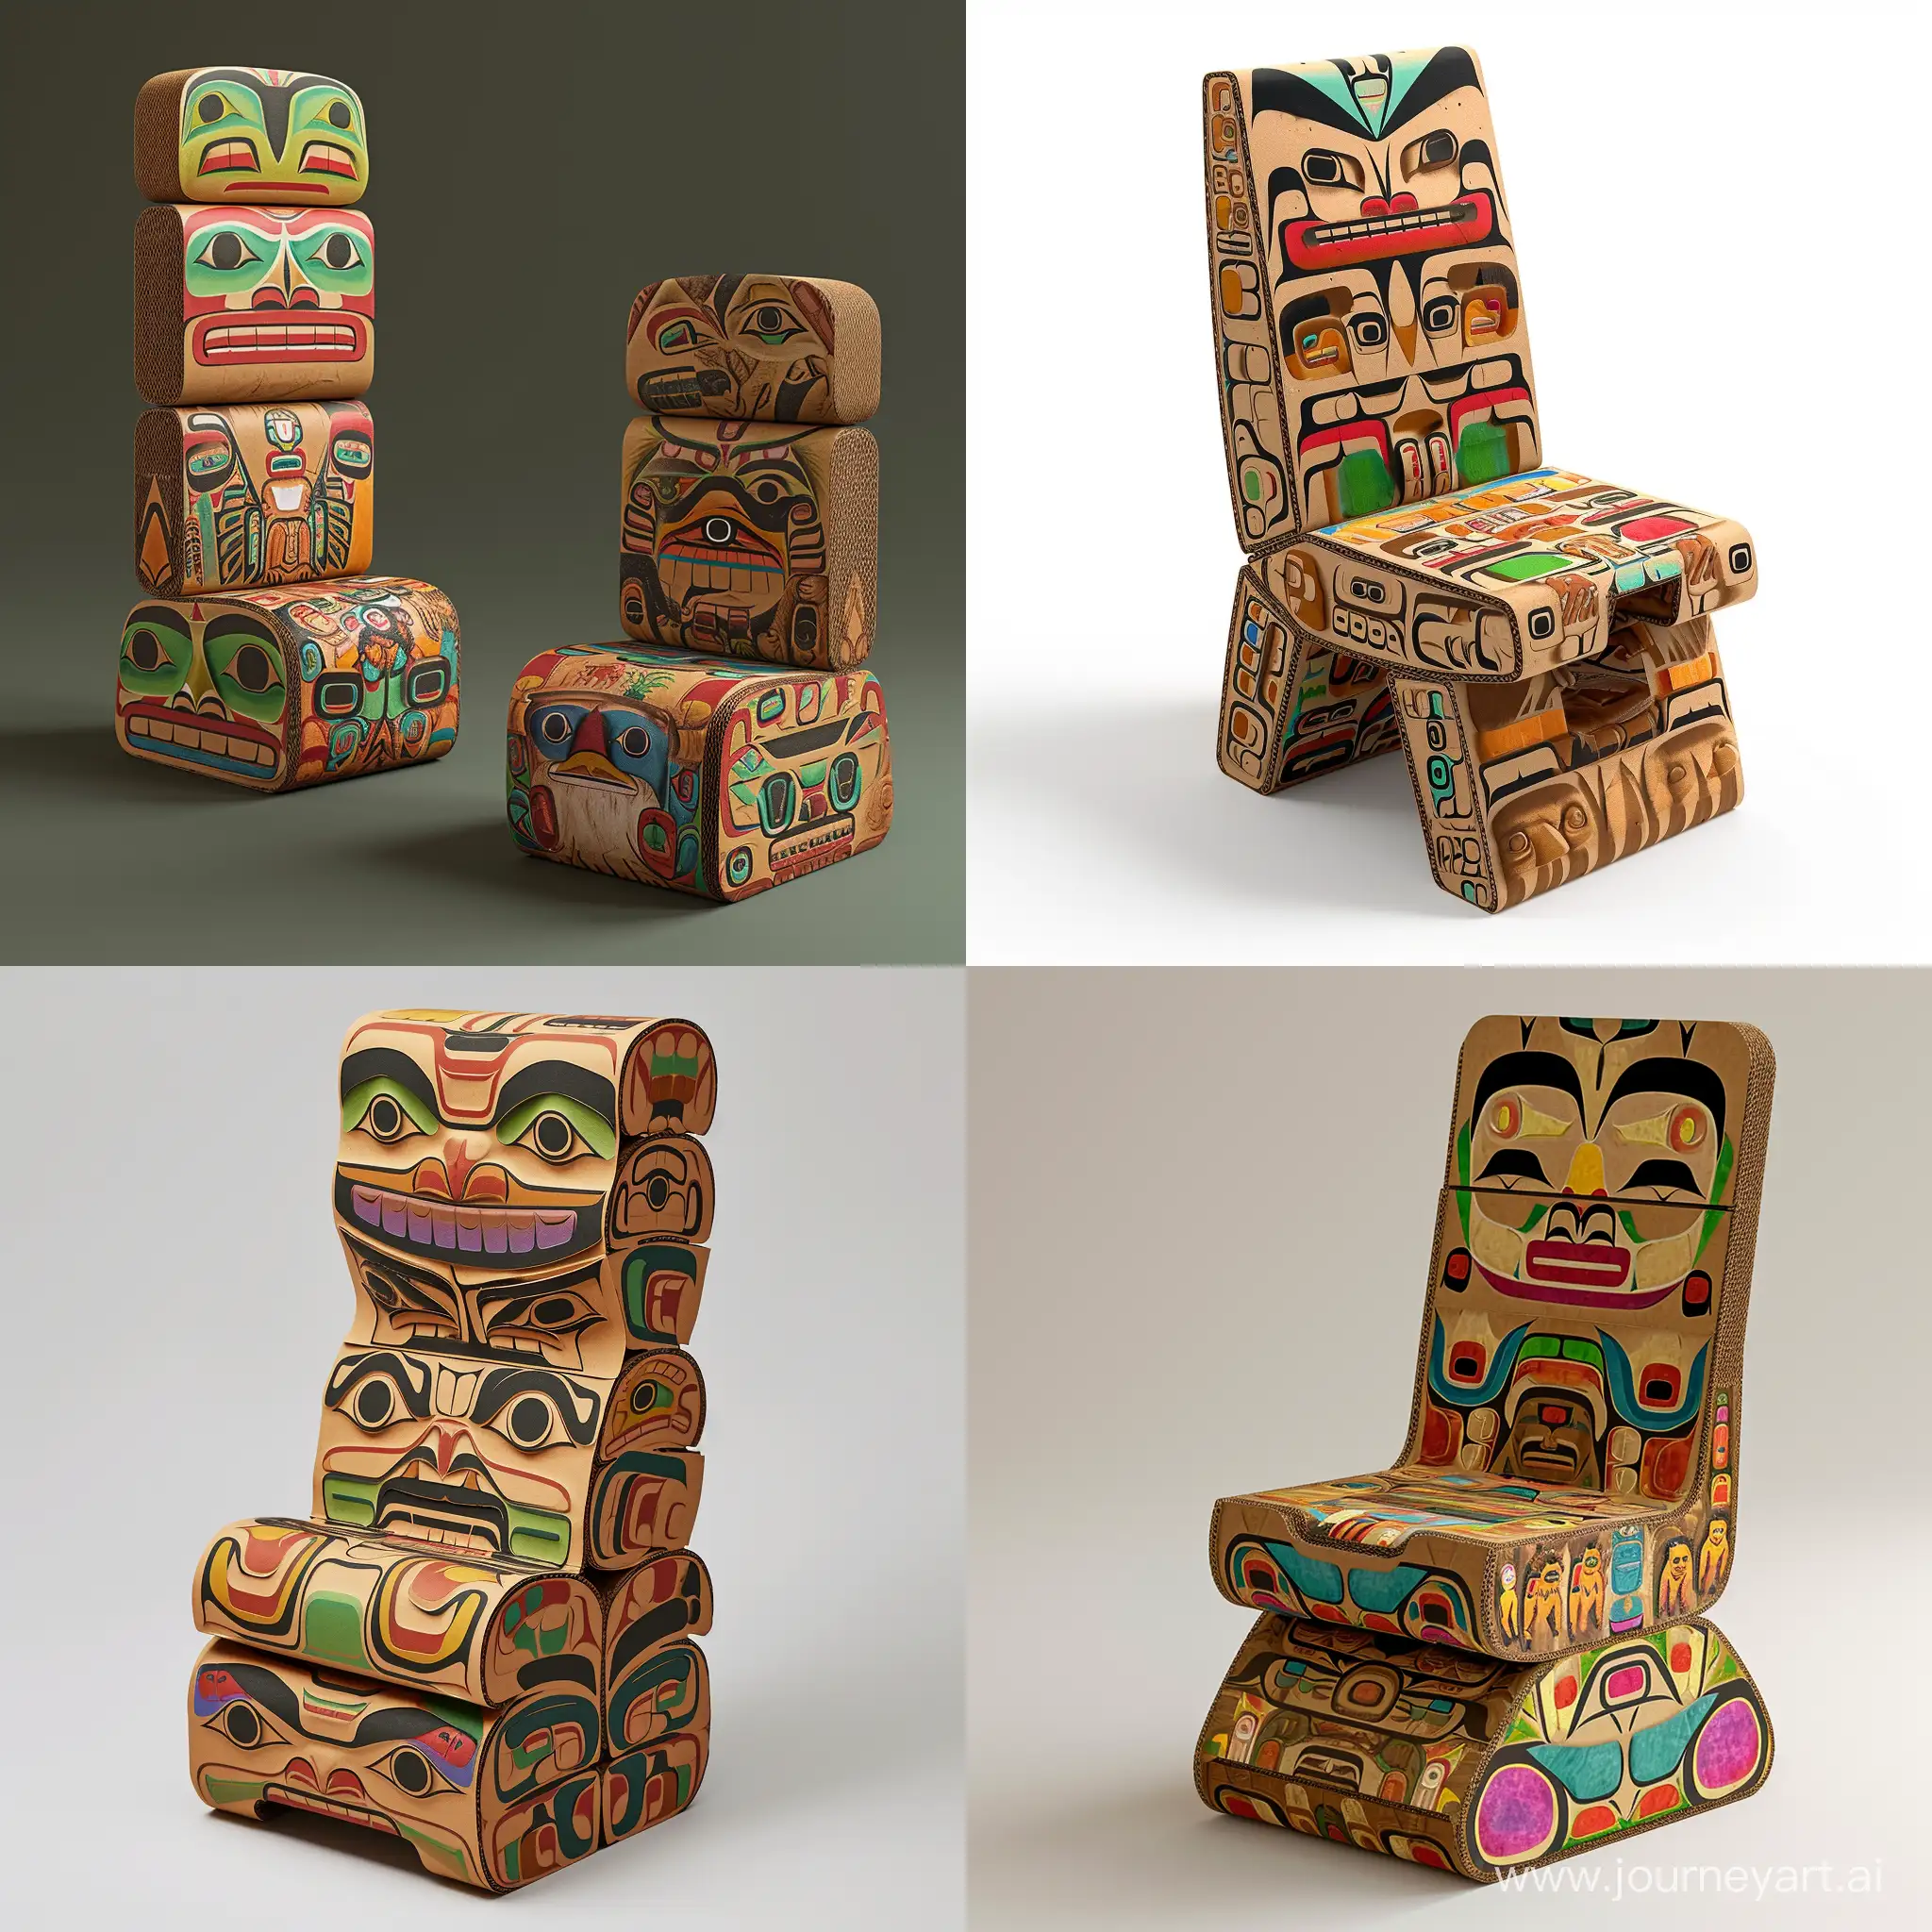  imagine small cute Totem Transformative Chair:Create an image of a children’s chair that blends ergonomic design with the vibrant, narrative-rich aesthetics of a totem pole. Each chair should have a gently curved seat, with an inclined backrest and slightly outward splayed legs for stability. When multiple chairs are stacked, they form a totem pole with interlocking grooves and ridges that secure each layer. The structure is composed of high-density recycled cardboard layered for strength. It’s coated with a child-safe sealant to make it durable and stain-resistant. Cushions on the seating surface should suggest eco-friendly foam covered with recyclable textile featuring culturally significant, digitally printed patterns. Earthy tones like rich browns, deep greens, muted reds, and ochre are to be used, with raised tactile details for the totem segments – animals and cultural motifs – rendered in a style that is both authentic and appealing to the modern, youthful eye. Edge banding on the cardboard protects from moisture and aids durability. Emphasize the dual functionality as both an educational tool and a practical piece of furniture, showcasing sustainability and cultural education in its design.realistic style